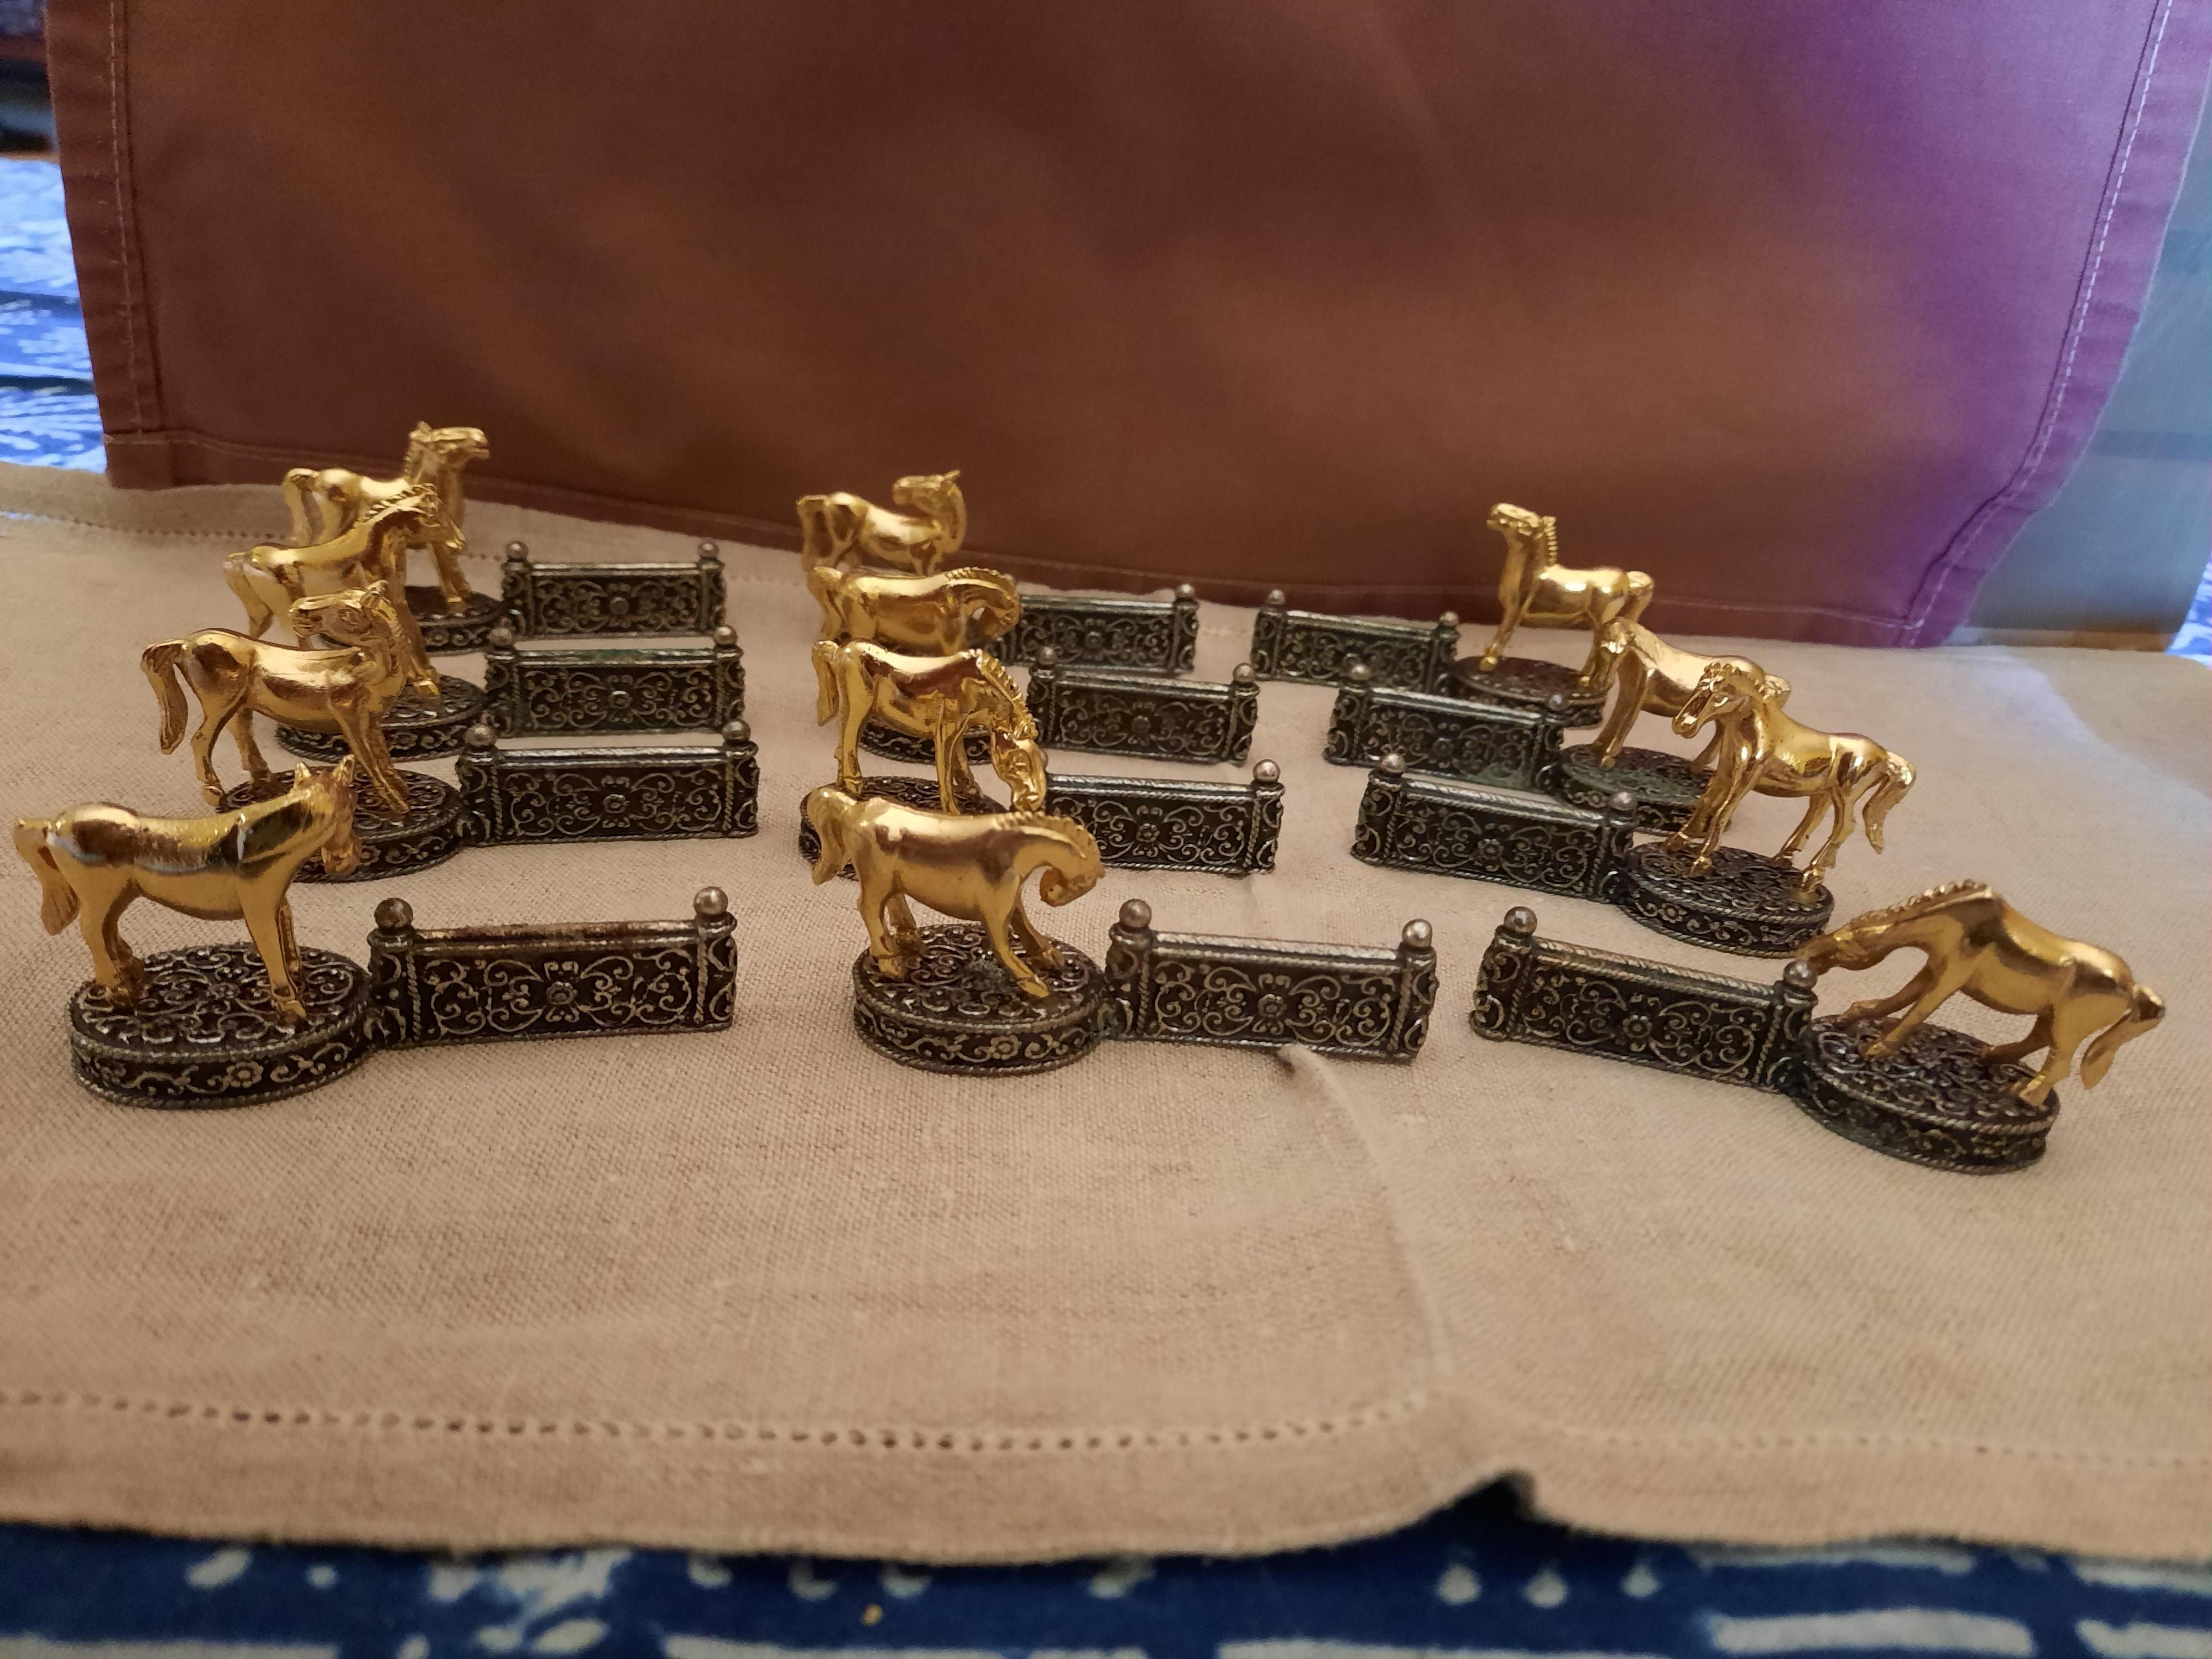 A rare to find original vintage set of 12 French horse knife/chopstick rests Iwith gold and silver plating of excellent quality and in virtually unused condition 
Size
Height 1.1/4